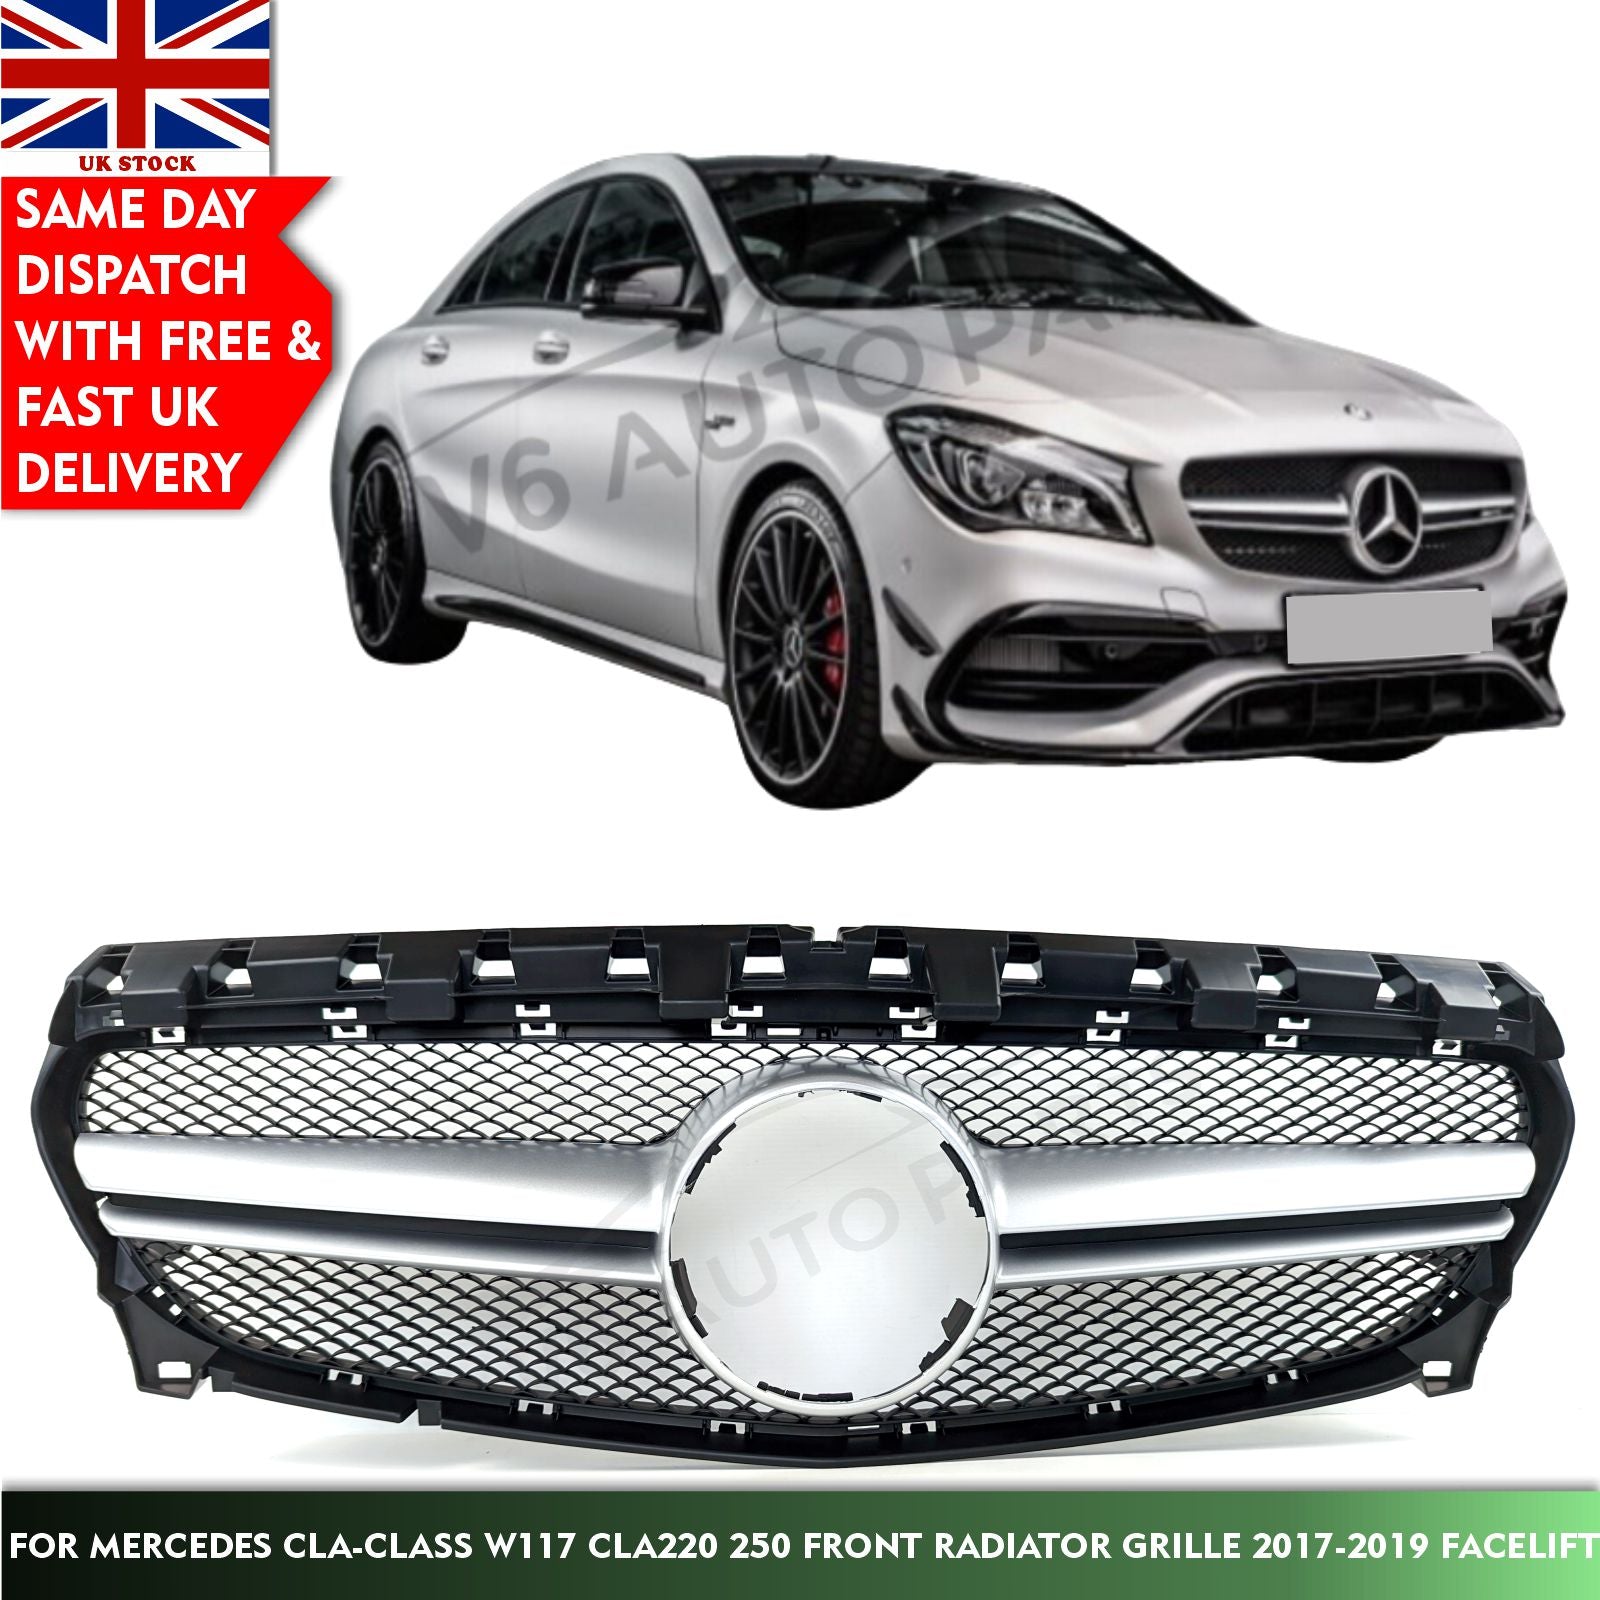 For Mercedes CLA-Class W117 CLA220 250 Front Radiator Grille 2017-2019 Facelift